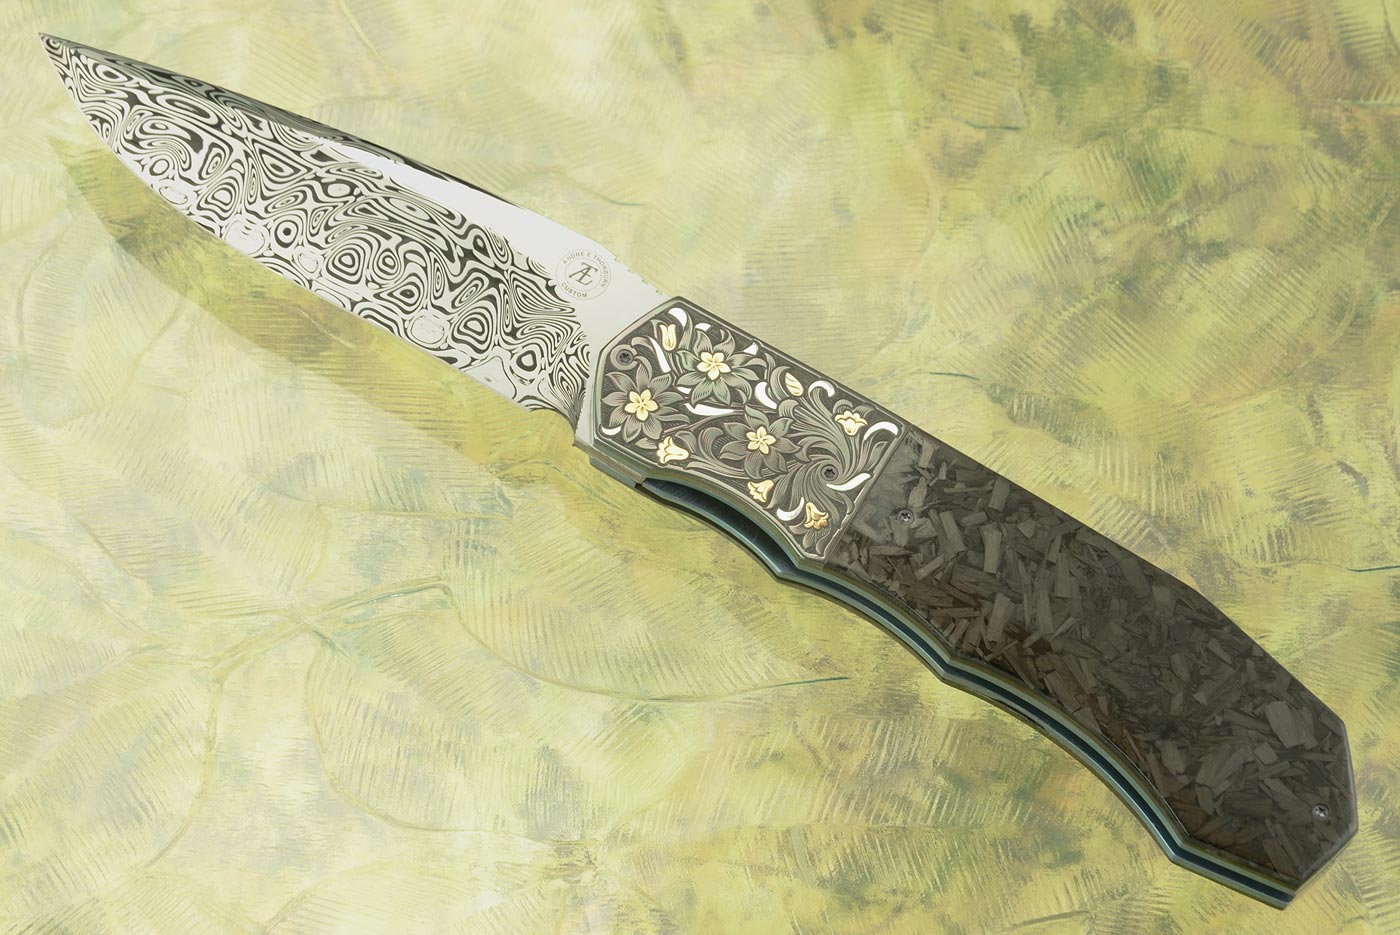 L44M Front Flipper with Damascus, Shred Carbon Fiber, and Engraved Zirconium with Gold and Silver Inlay (Ceramic IKBS)